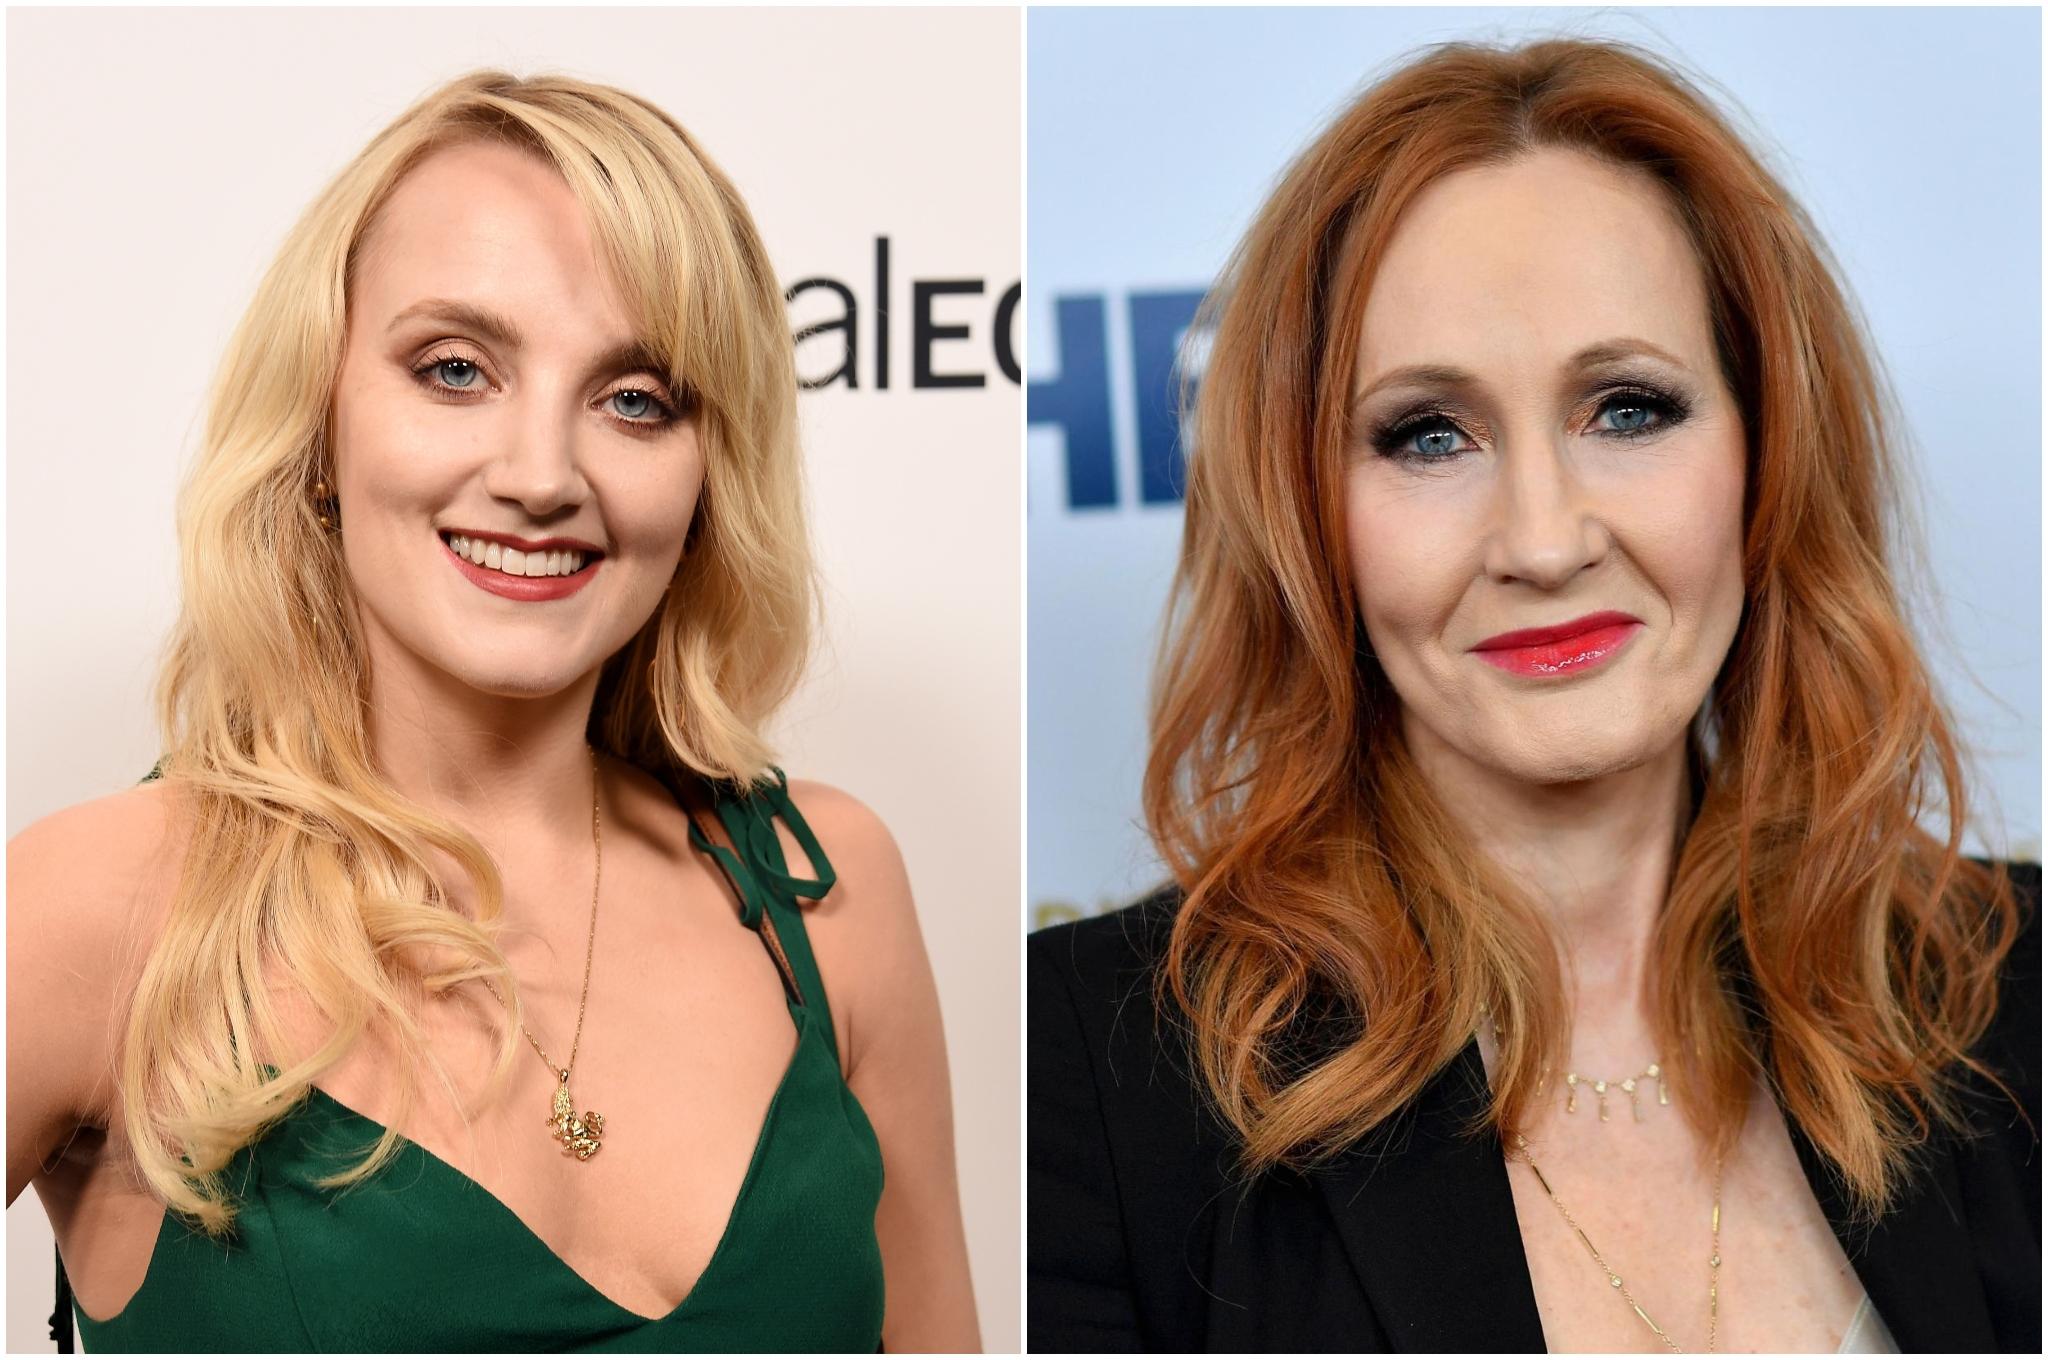 Harry Potter star Evanna Lynch apologises to transgender fans for JK Rowling comments